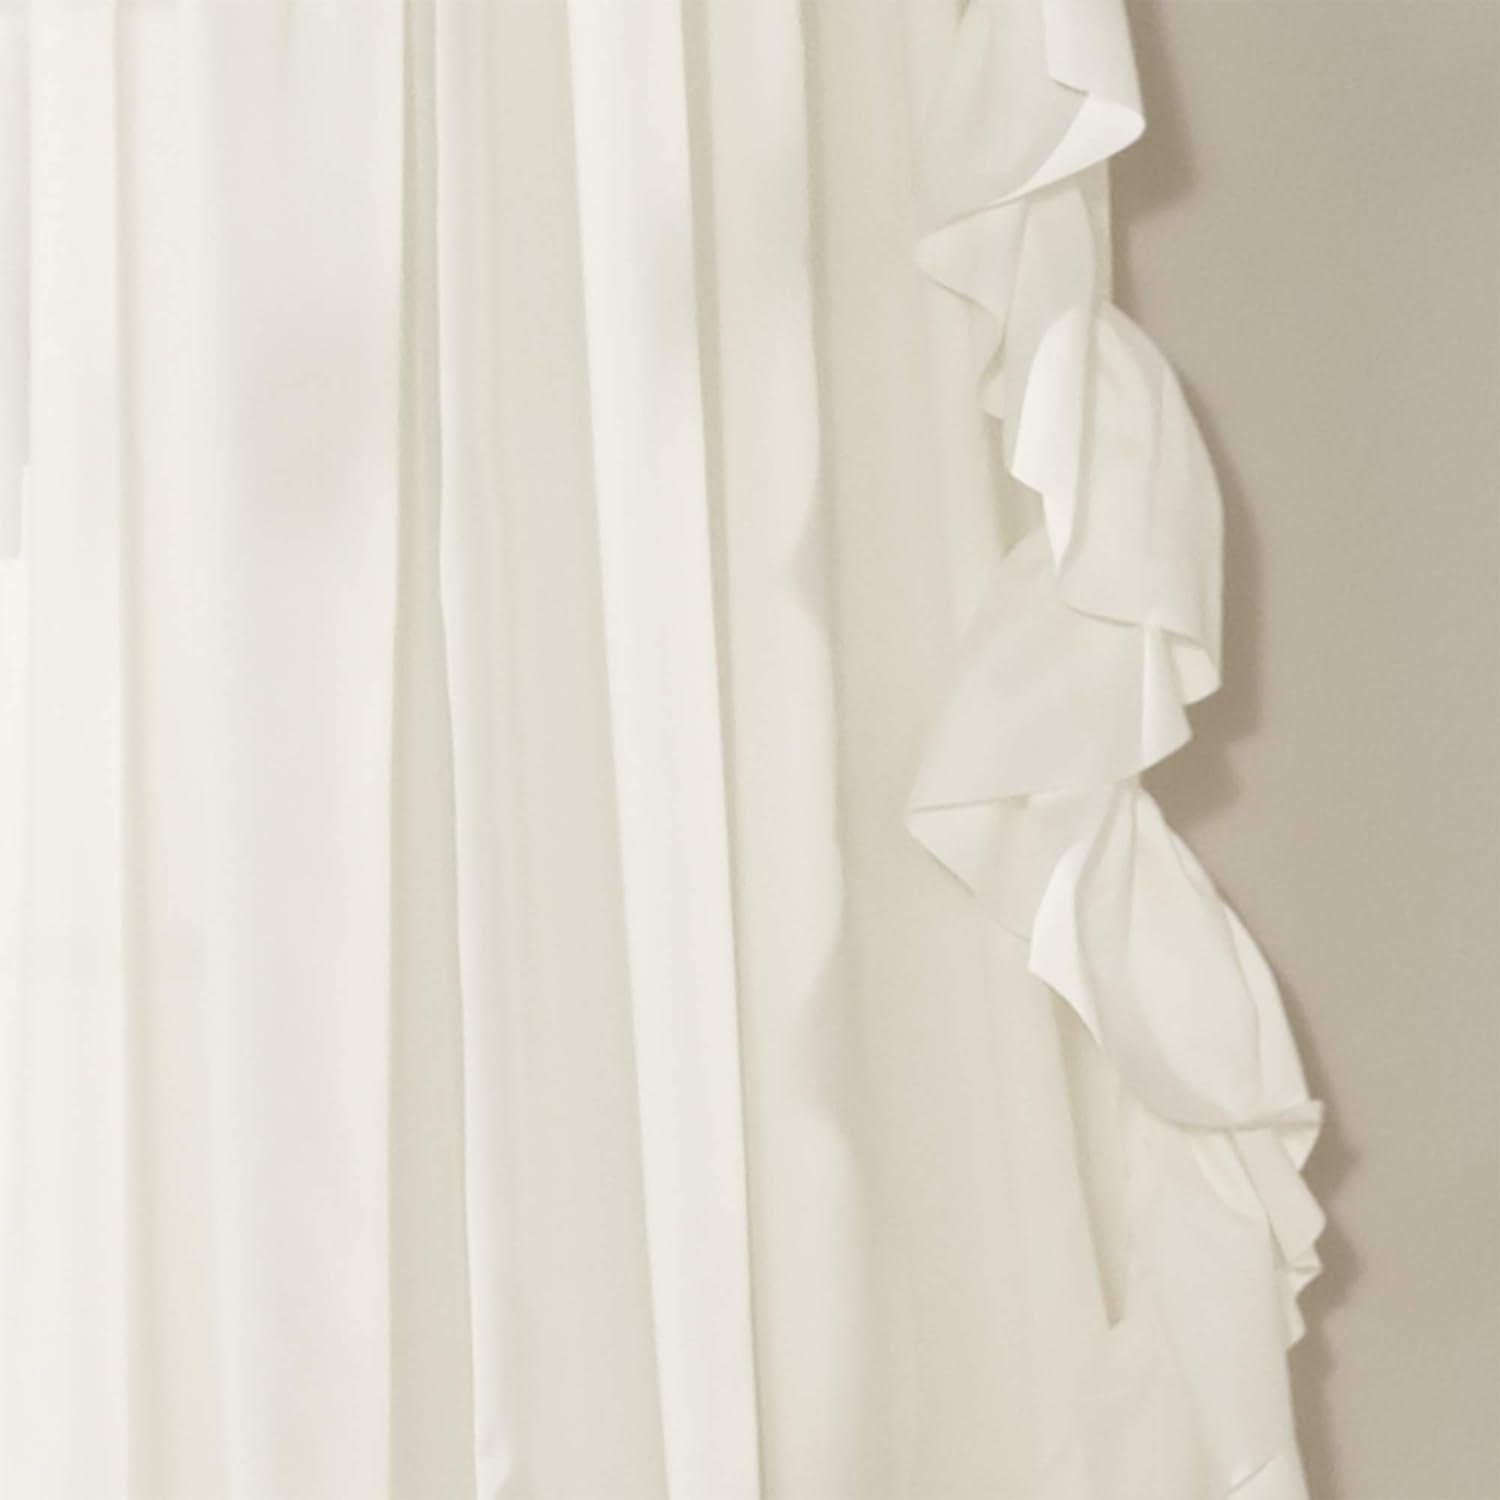 Reyna Ruffle Window Curtain Panel Set for Living, Dining, Bedroom (Pair), 54"W X 108"L, White